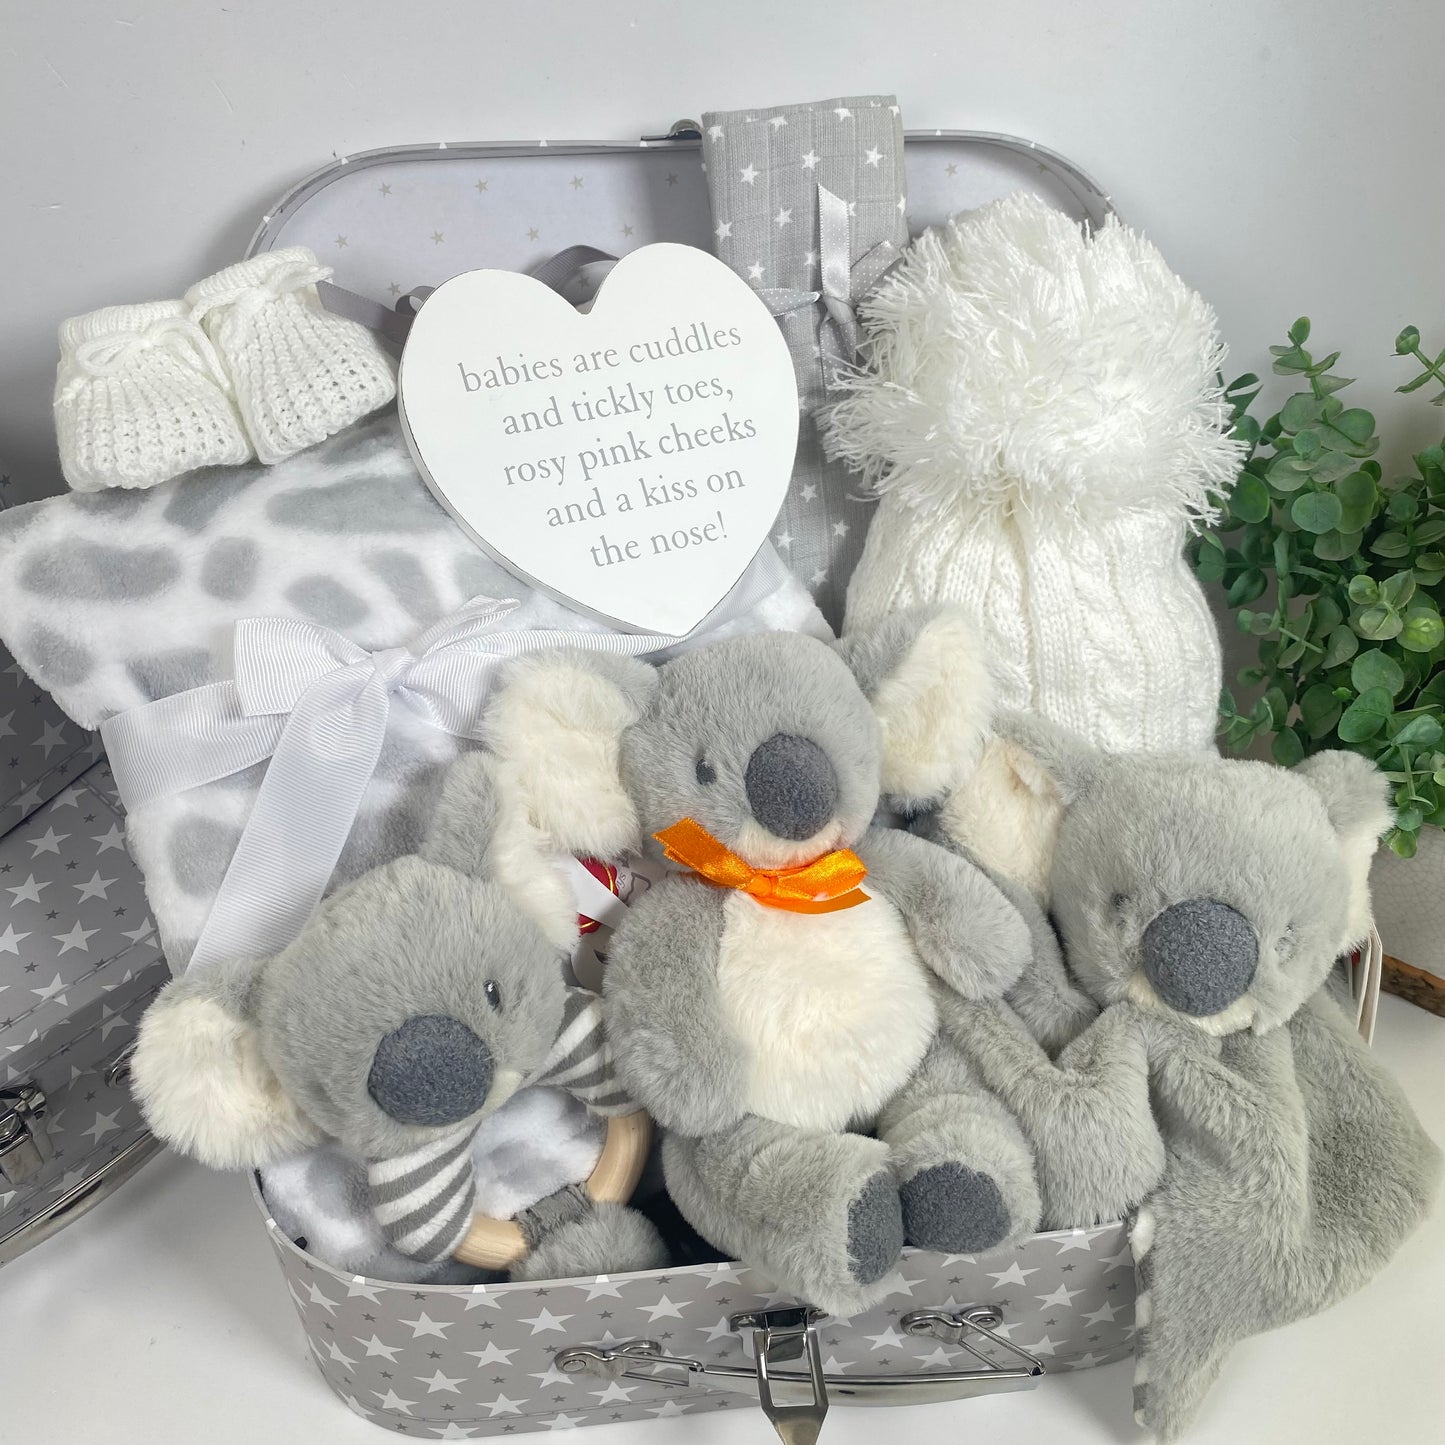 The Koala themed baby hamper comes in a grey and white baby keepsakecase with a pattern of stars. There is a grey and white "giraffe" print baby blanket, white baby pompom hat, a grey and white str pattern muslin square, a pair of white baby booities, a nursery plaque withe the text "babies are cuddles and tickly toes, rosy pink cheeks and a kiss on the nose". There ate three koala bear toys in this baby hamper